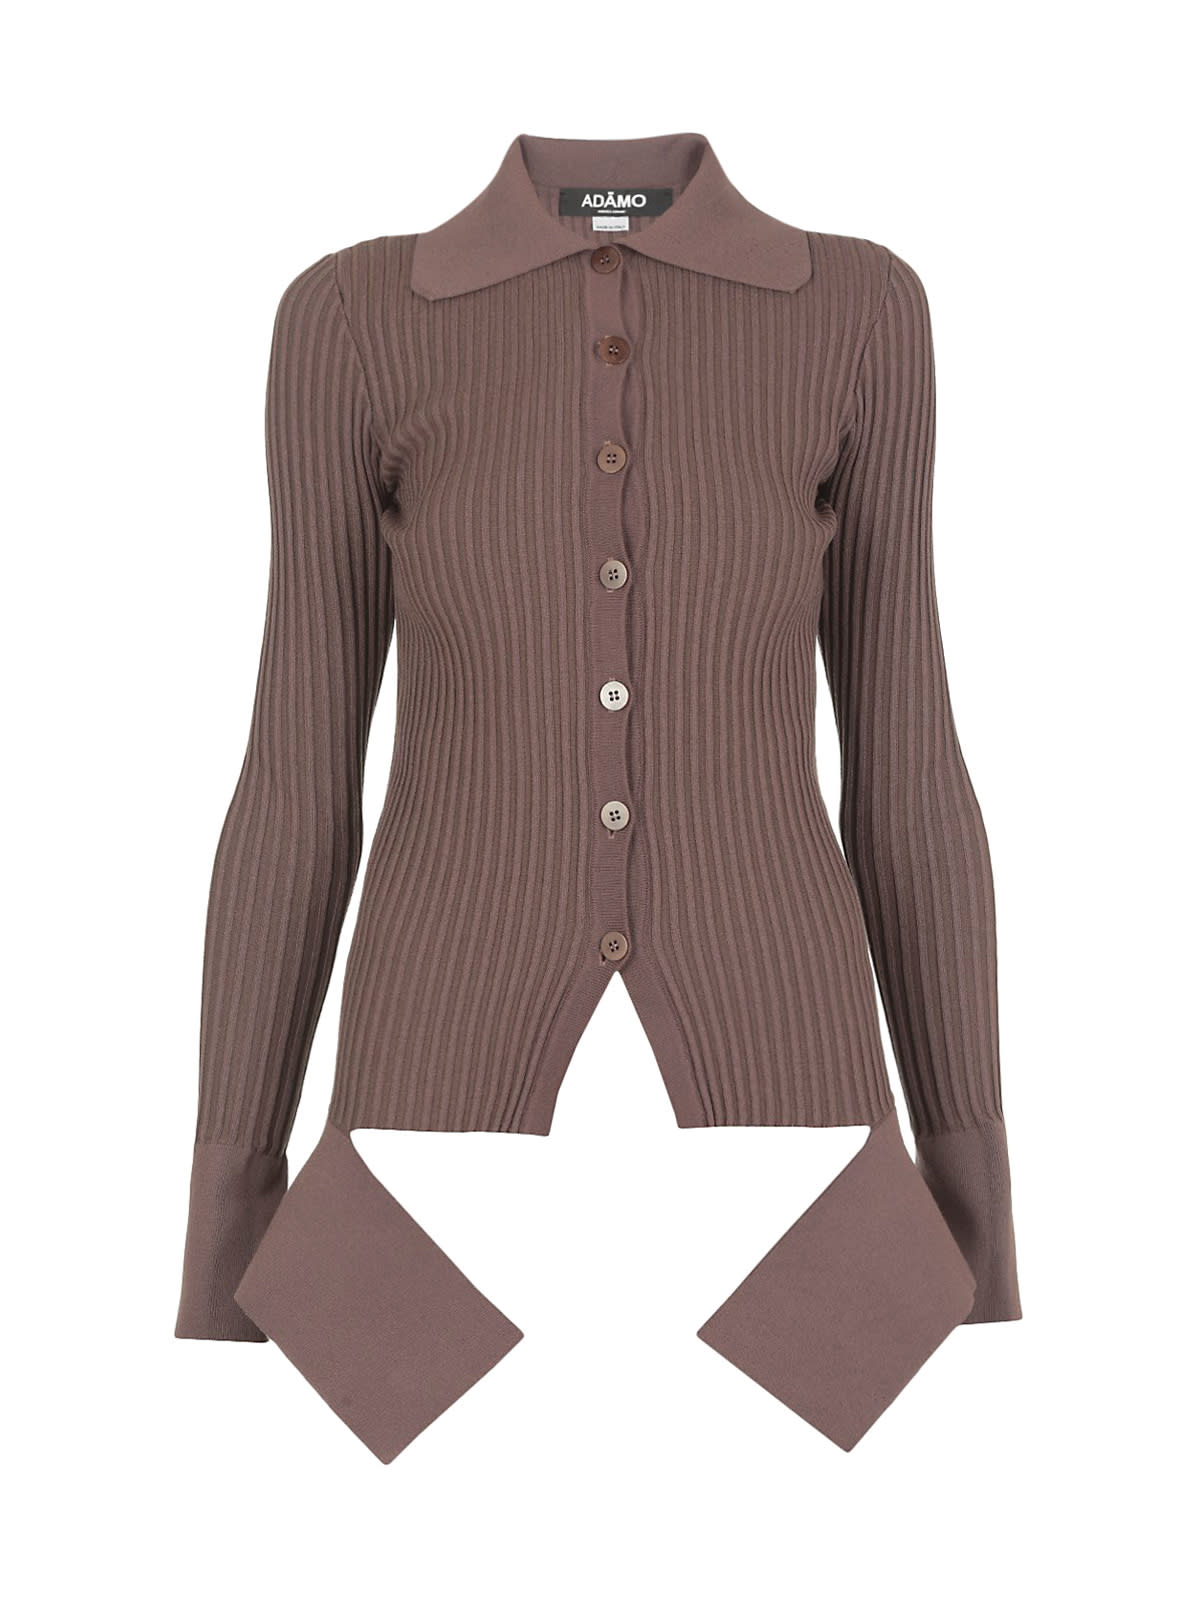 ANDREADAMO Cardigan Long Sleeve With Cut Out Detail